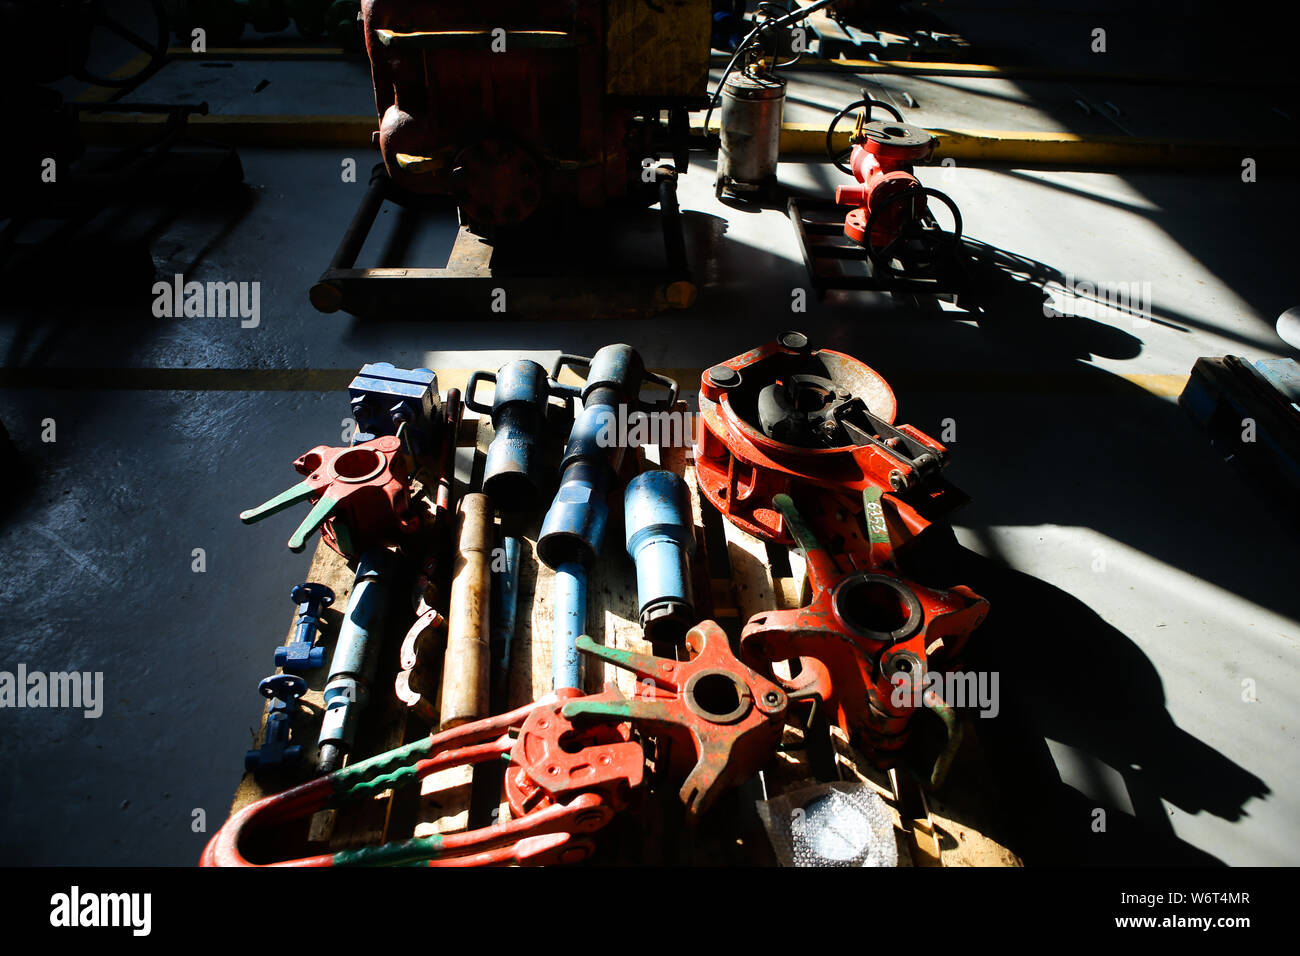 Shallow depth of field image with iron industrial equipment used in the oil and gas drilling industry laid on the ground of a workshop Stock Photo